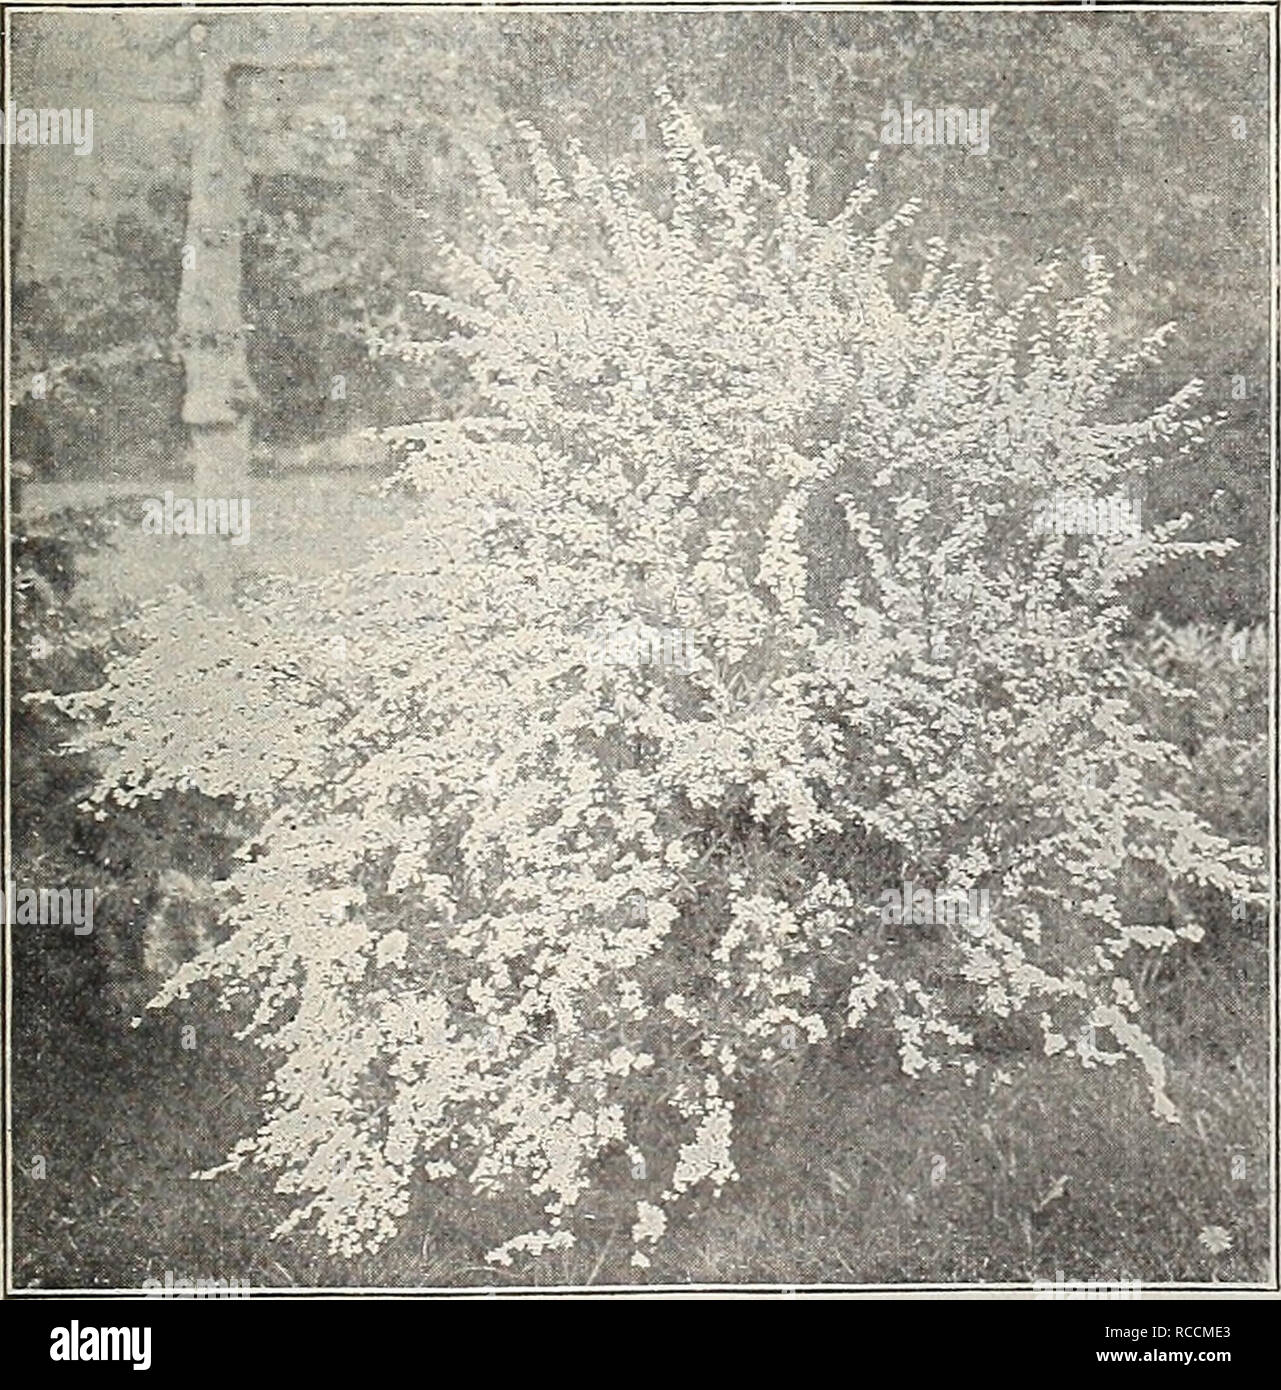 . Dreer's 1909 garden book. Seeds Catalogs; Nursery stock Catalogs; Gardening Equipment and supplies Catalogs; Flowers Seeds Catalogs; Vegetables Seeds Catalogs; Fruit Seeds Catalogs. Spir.ea Van Houttei. SpirÂ«a Reevesii T Spiraea Margaritae. A handsome free-flowering variety with large, flat heads of soft pink flowers from June to October; grows from 3 to 4 feet high, and is one of the most desirable varieties in our collection. 25 cts. each. â Opulifolia aurea {I'irginian Guelder Rose). An in- teresting variety of medium growth with golden-tinted foliage and large white flowers in June. 25  Stock Photo